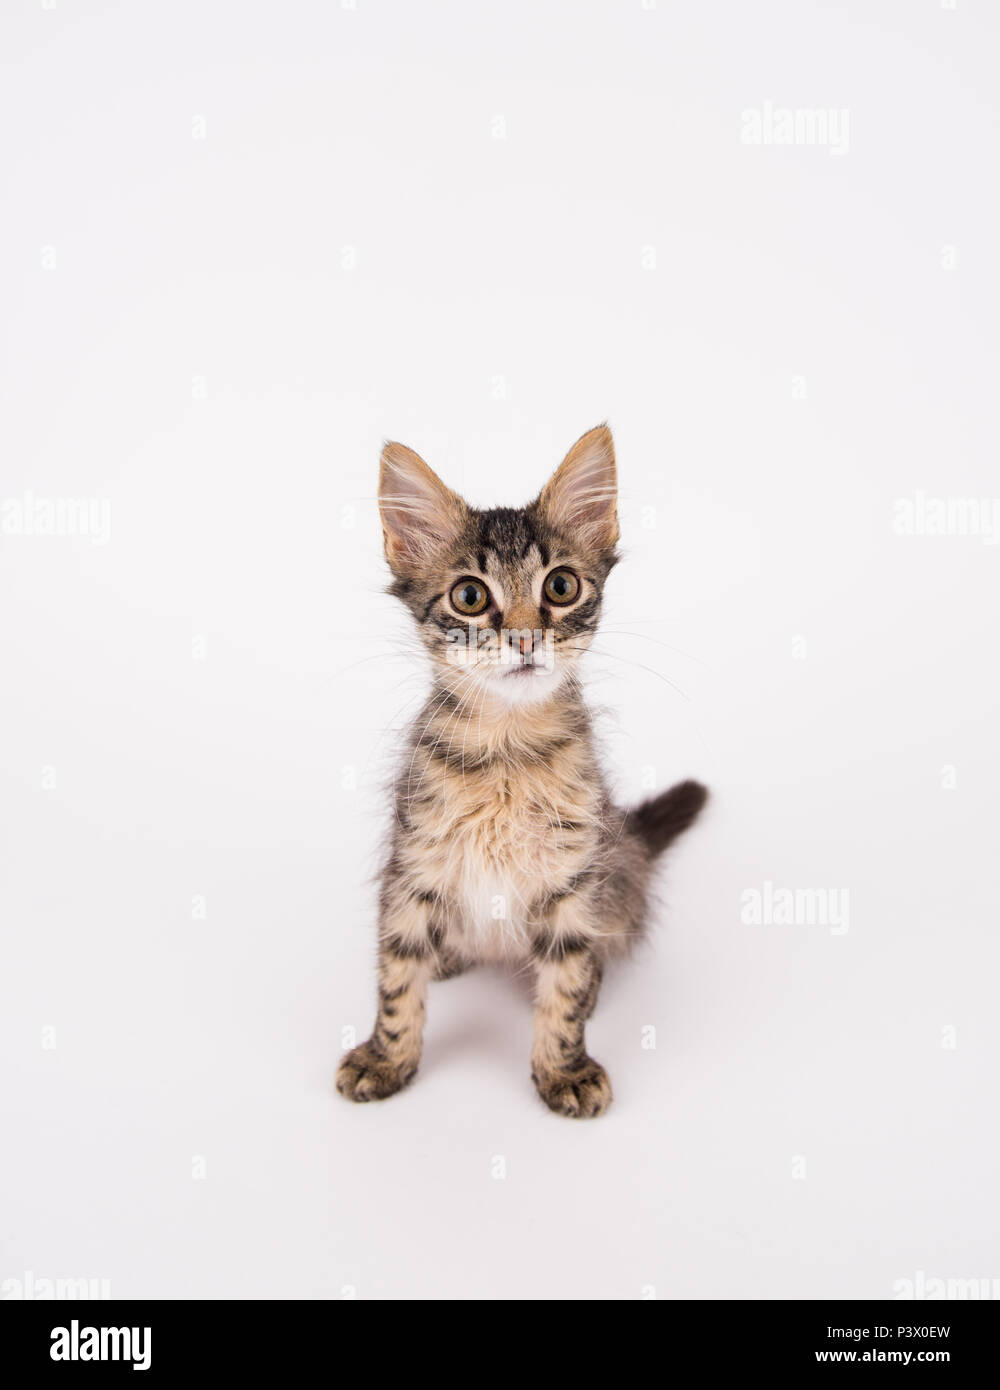 Young Funny Looking Kitten on White Background Stock Photo